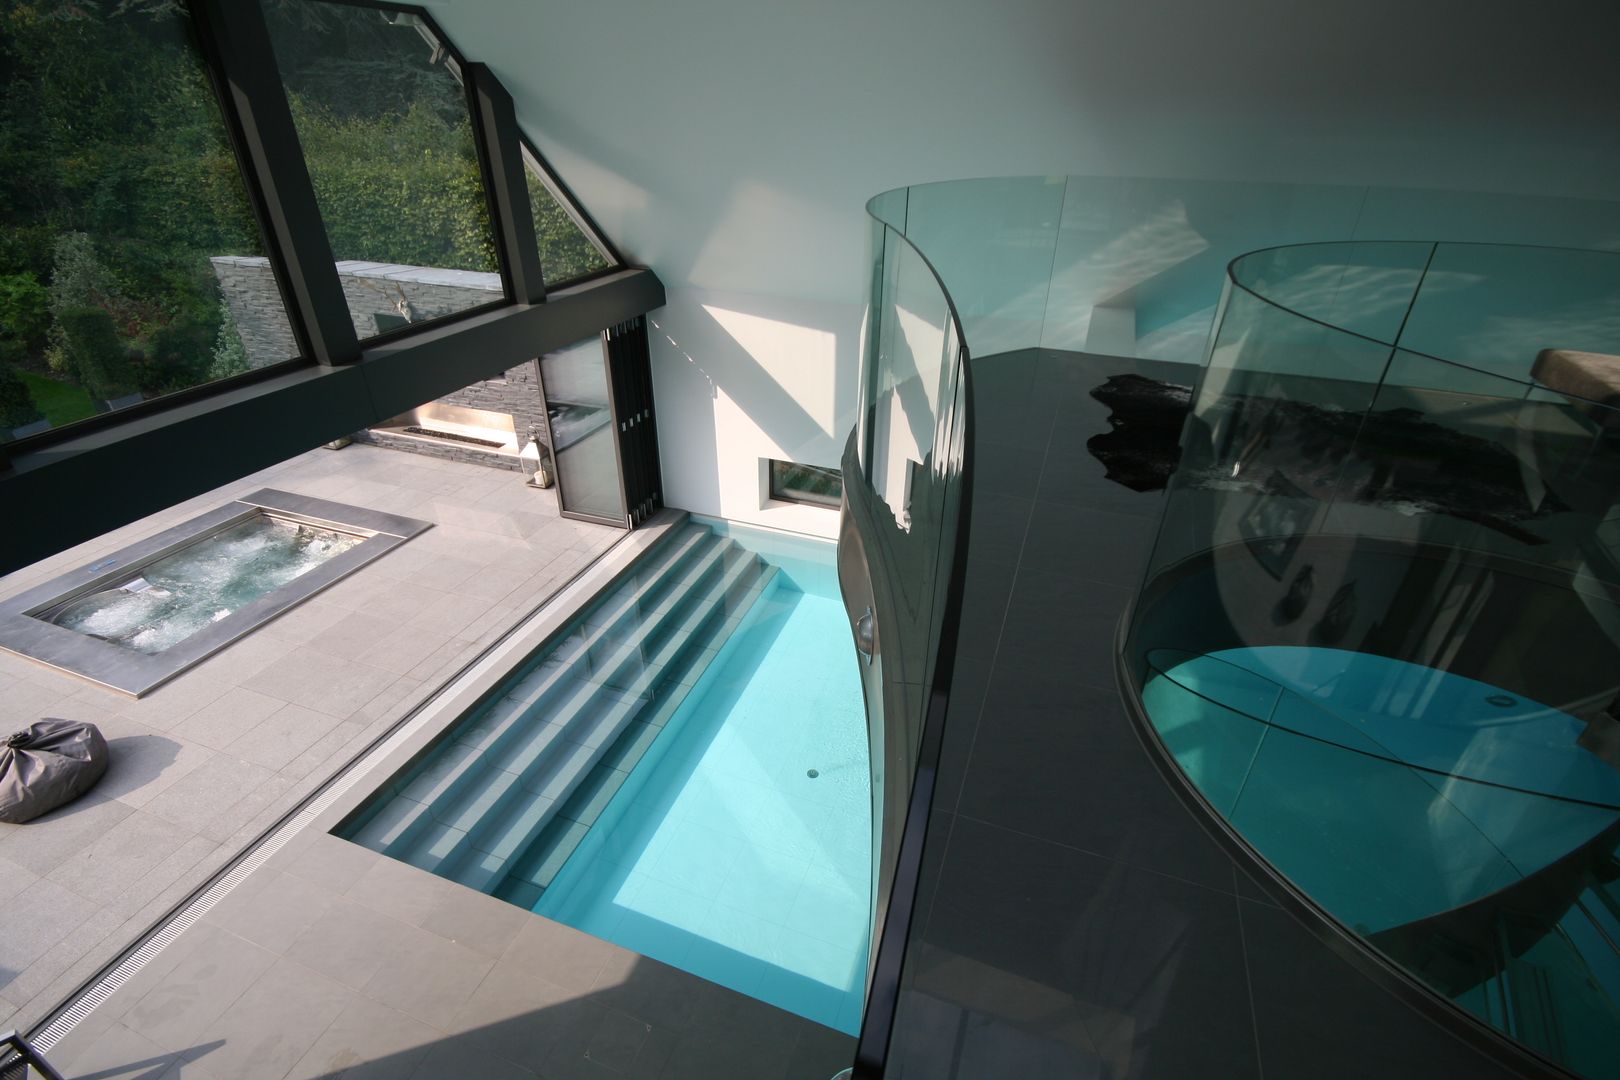 Indoor pool with waterfall features, sauna and stainless steel spa, Tanby Pools Tanby Pools Modern pool